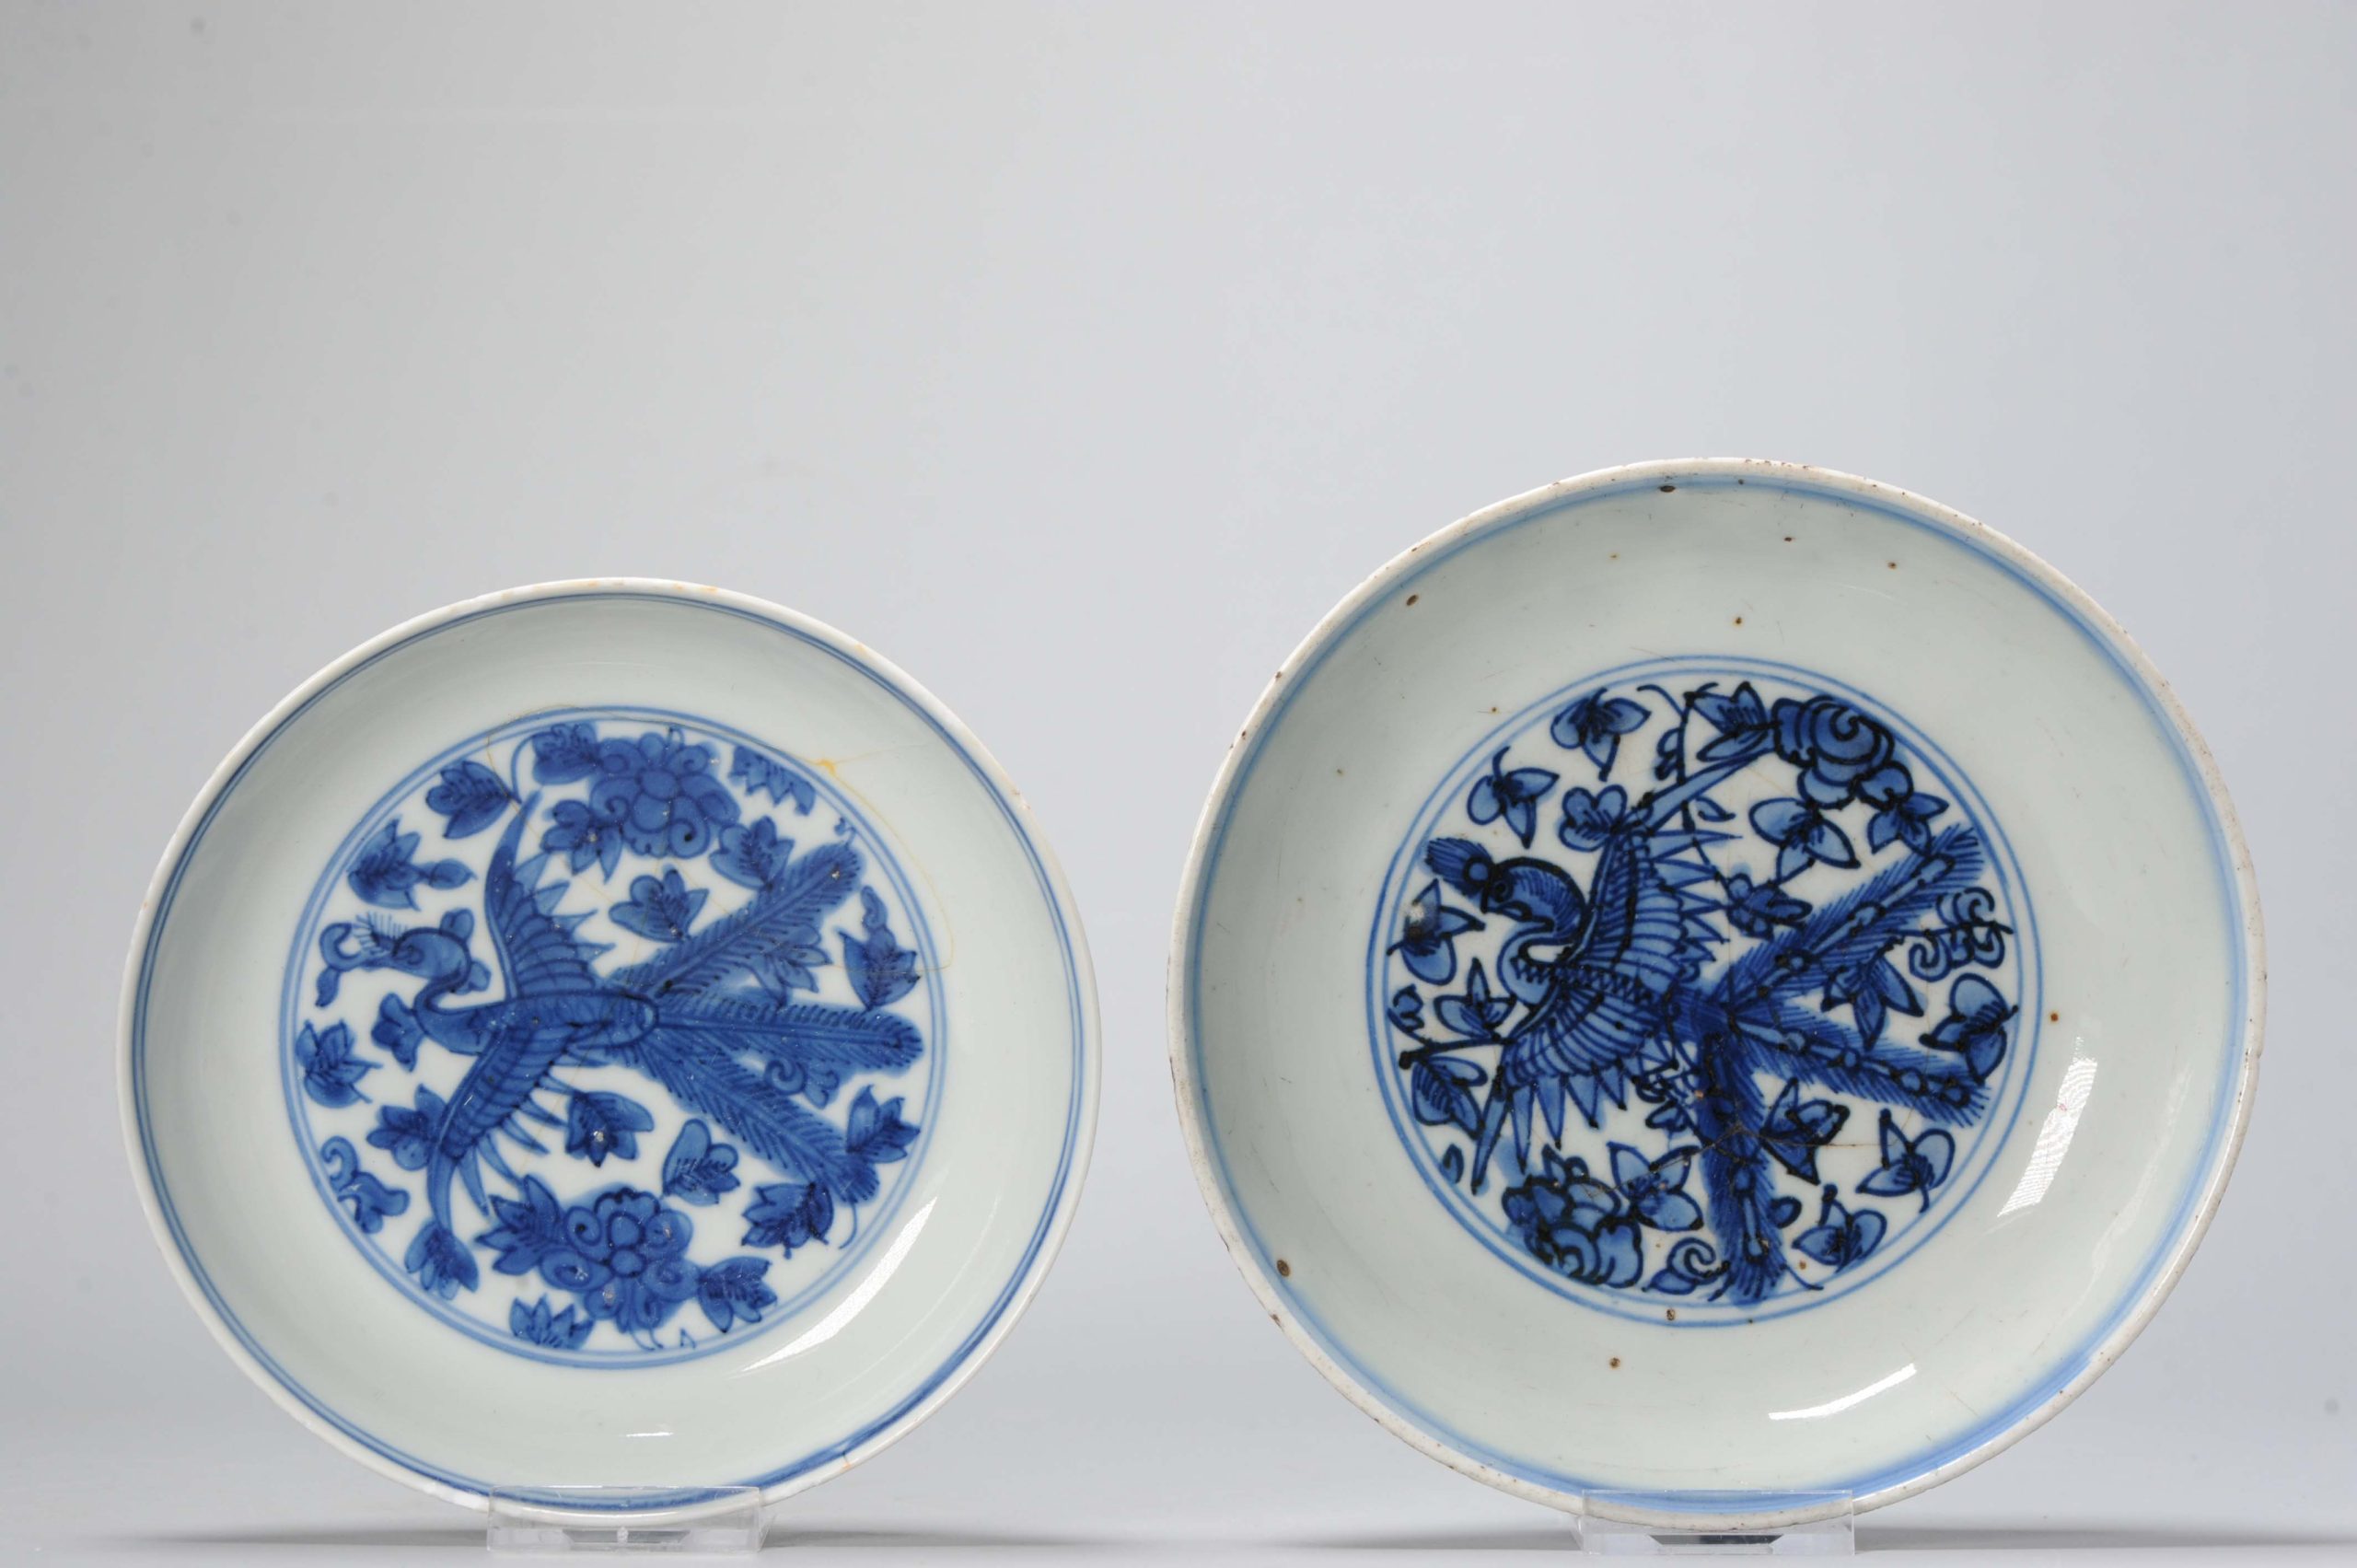 0997 & 0998 A pair of Chinese porcelain Ming dishes in blue and white with fenghuang